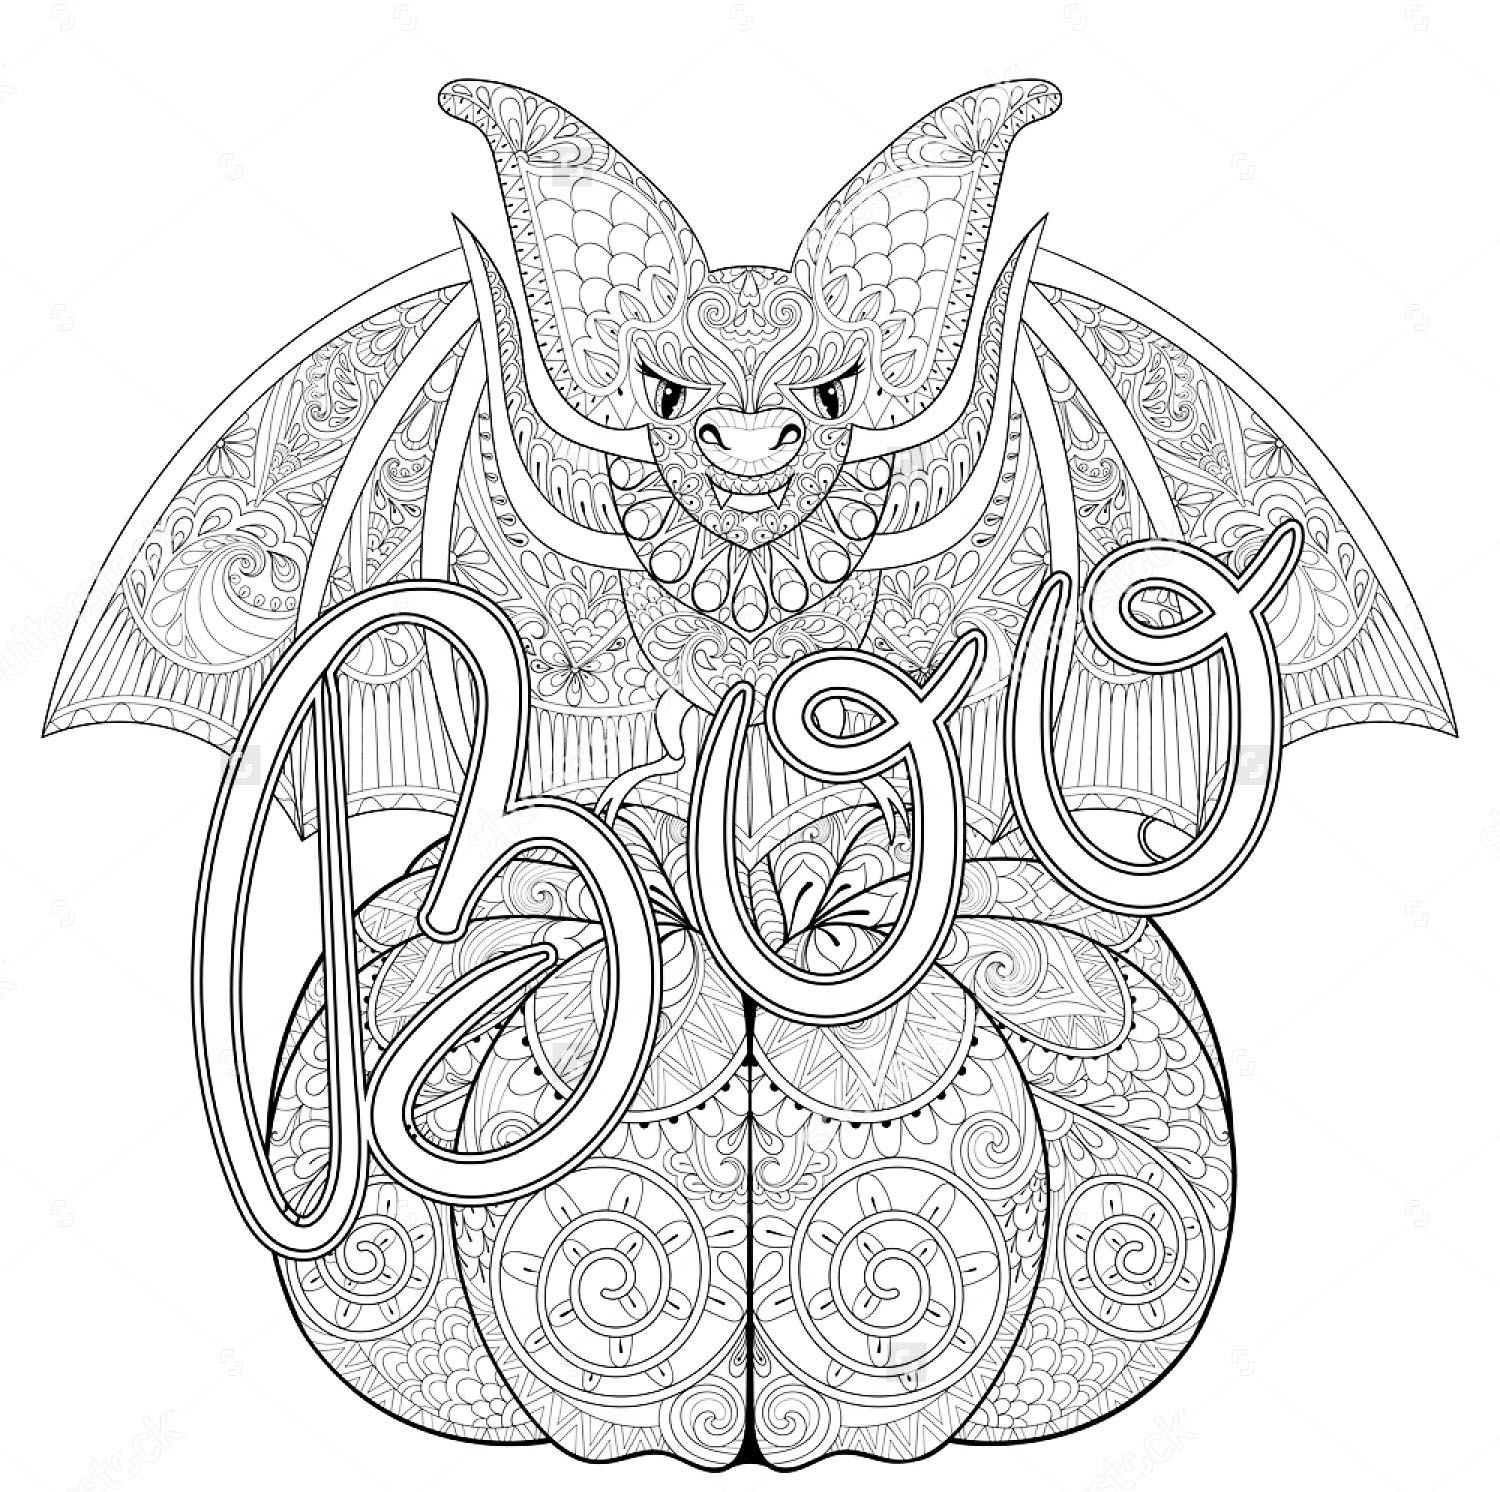 Adult Coloring Pages For Free
 12 Halloween Coloring Page Printables to Keep Kids and